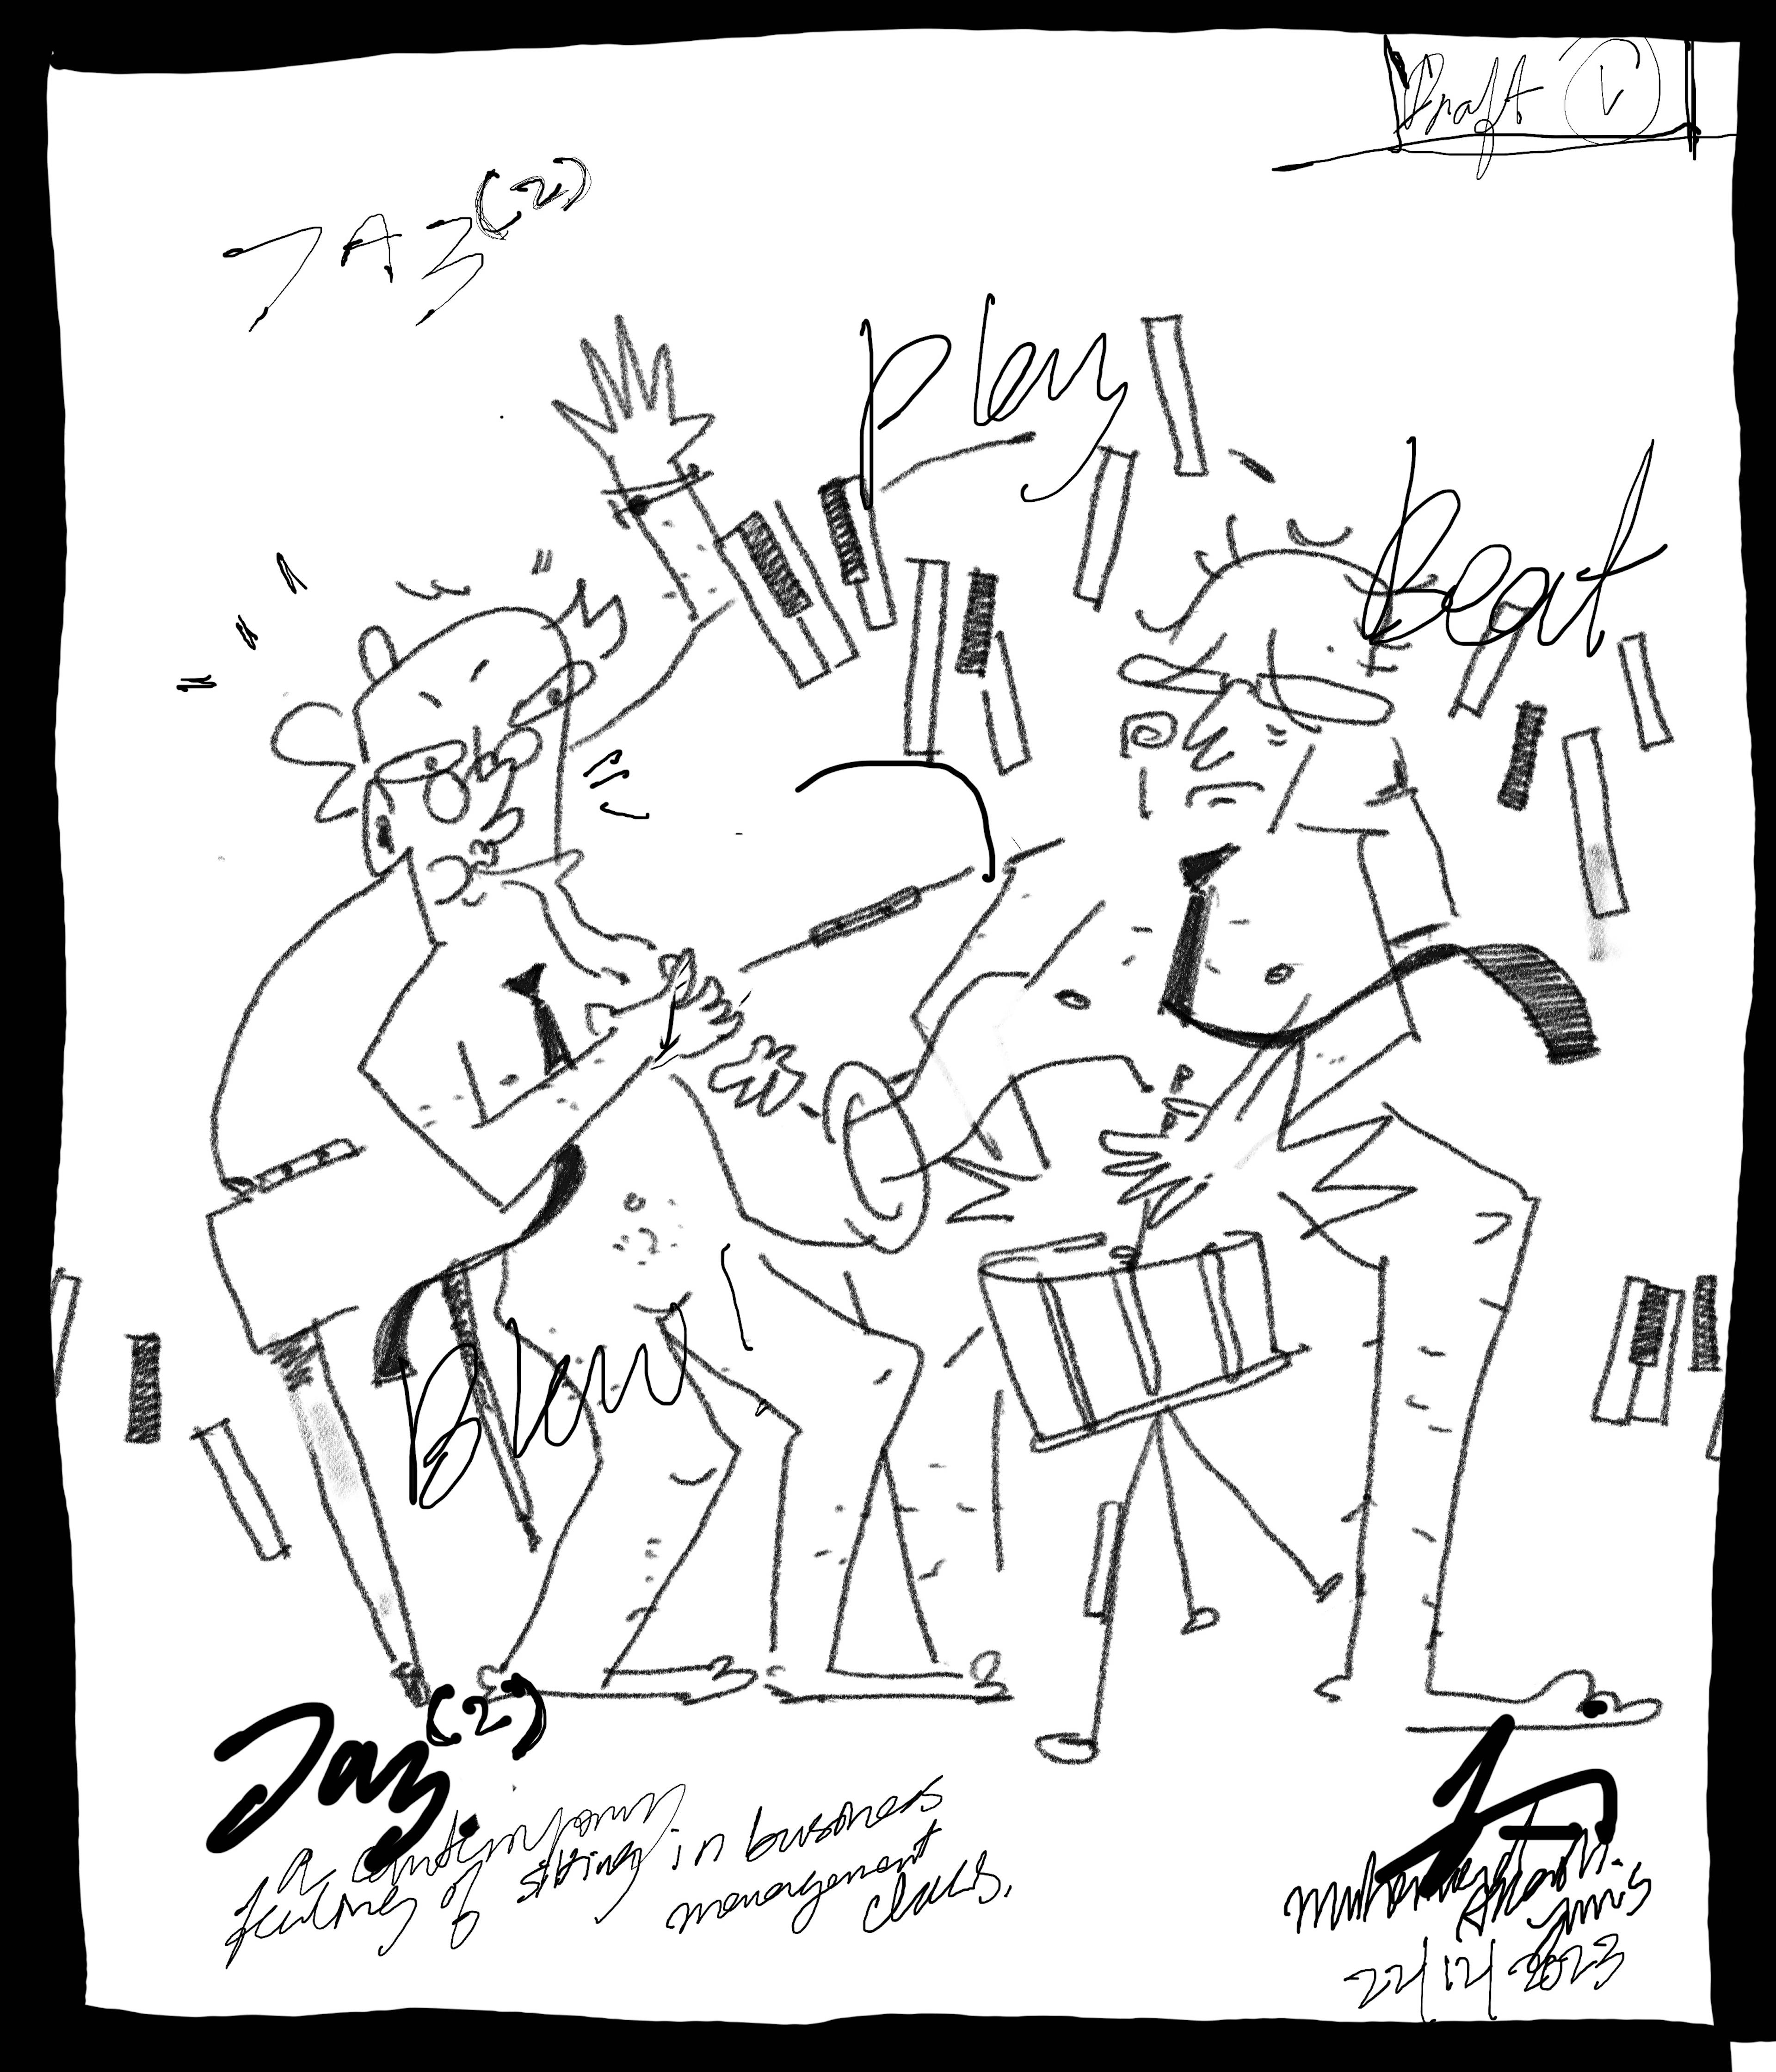 Illustration of a band